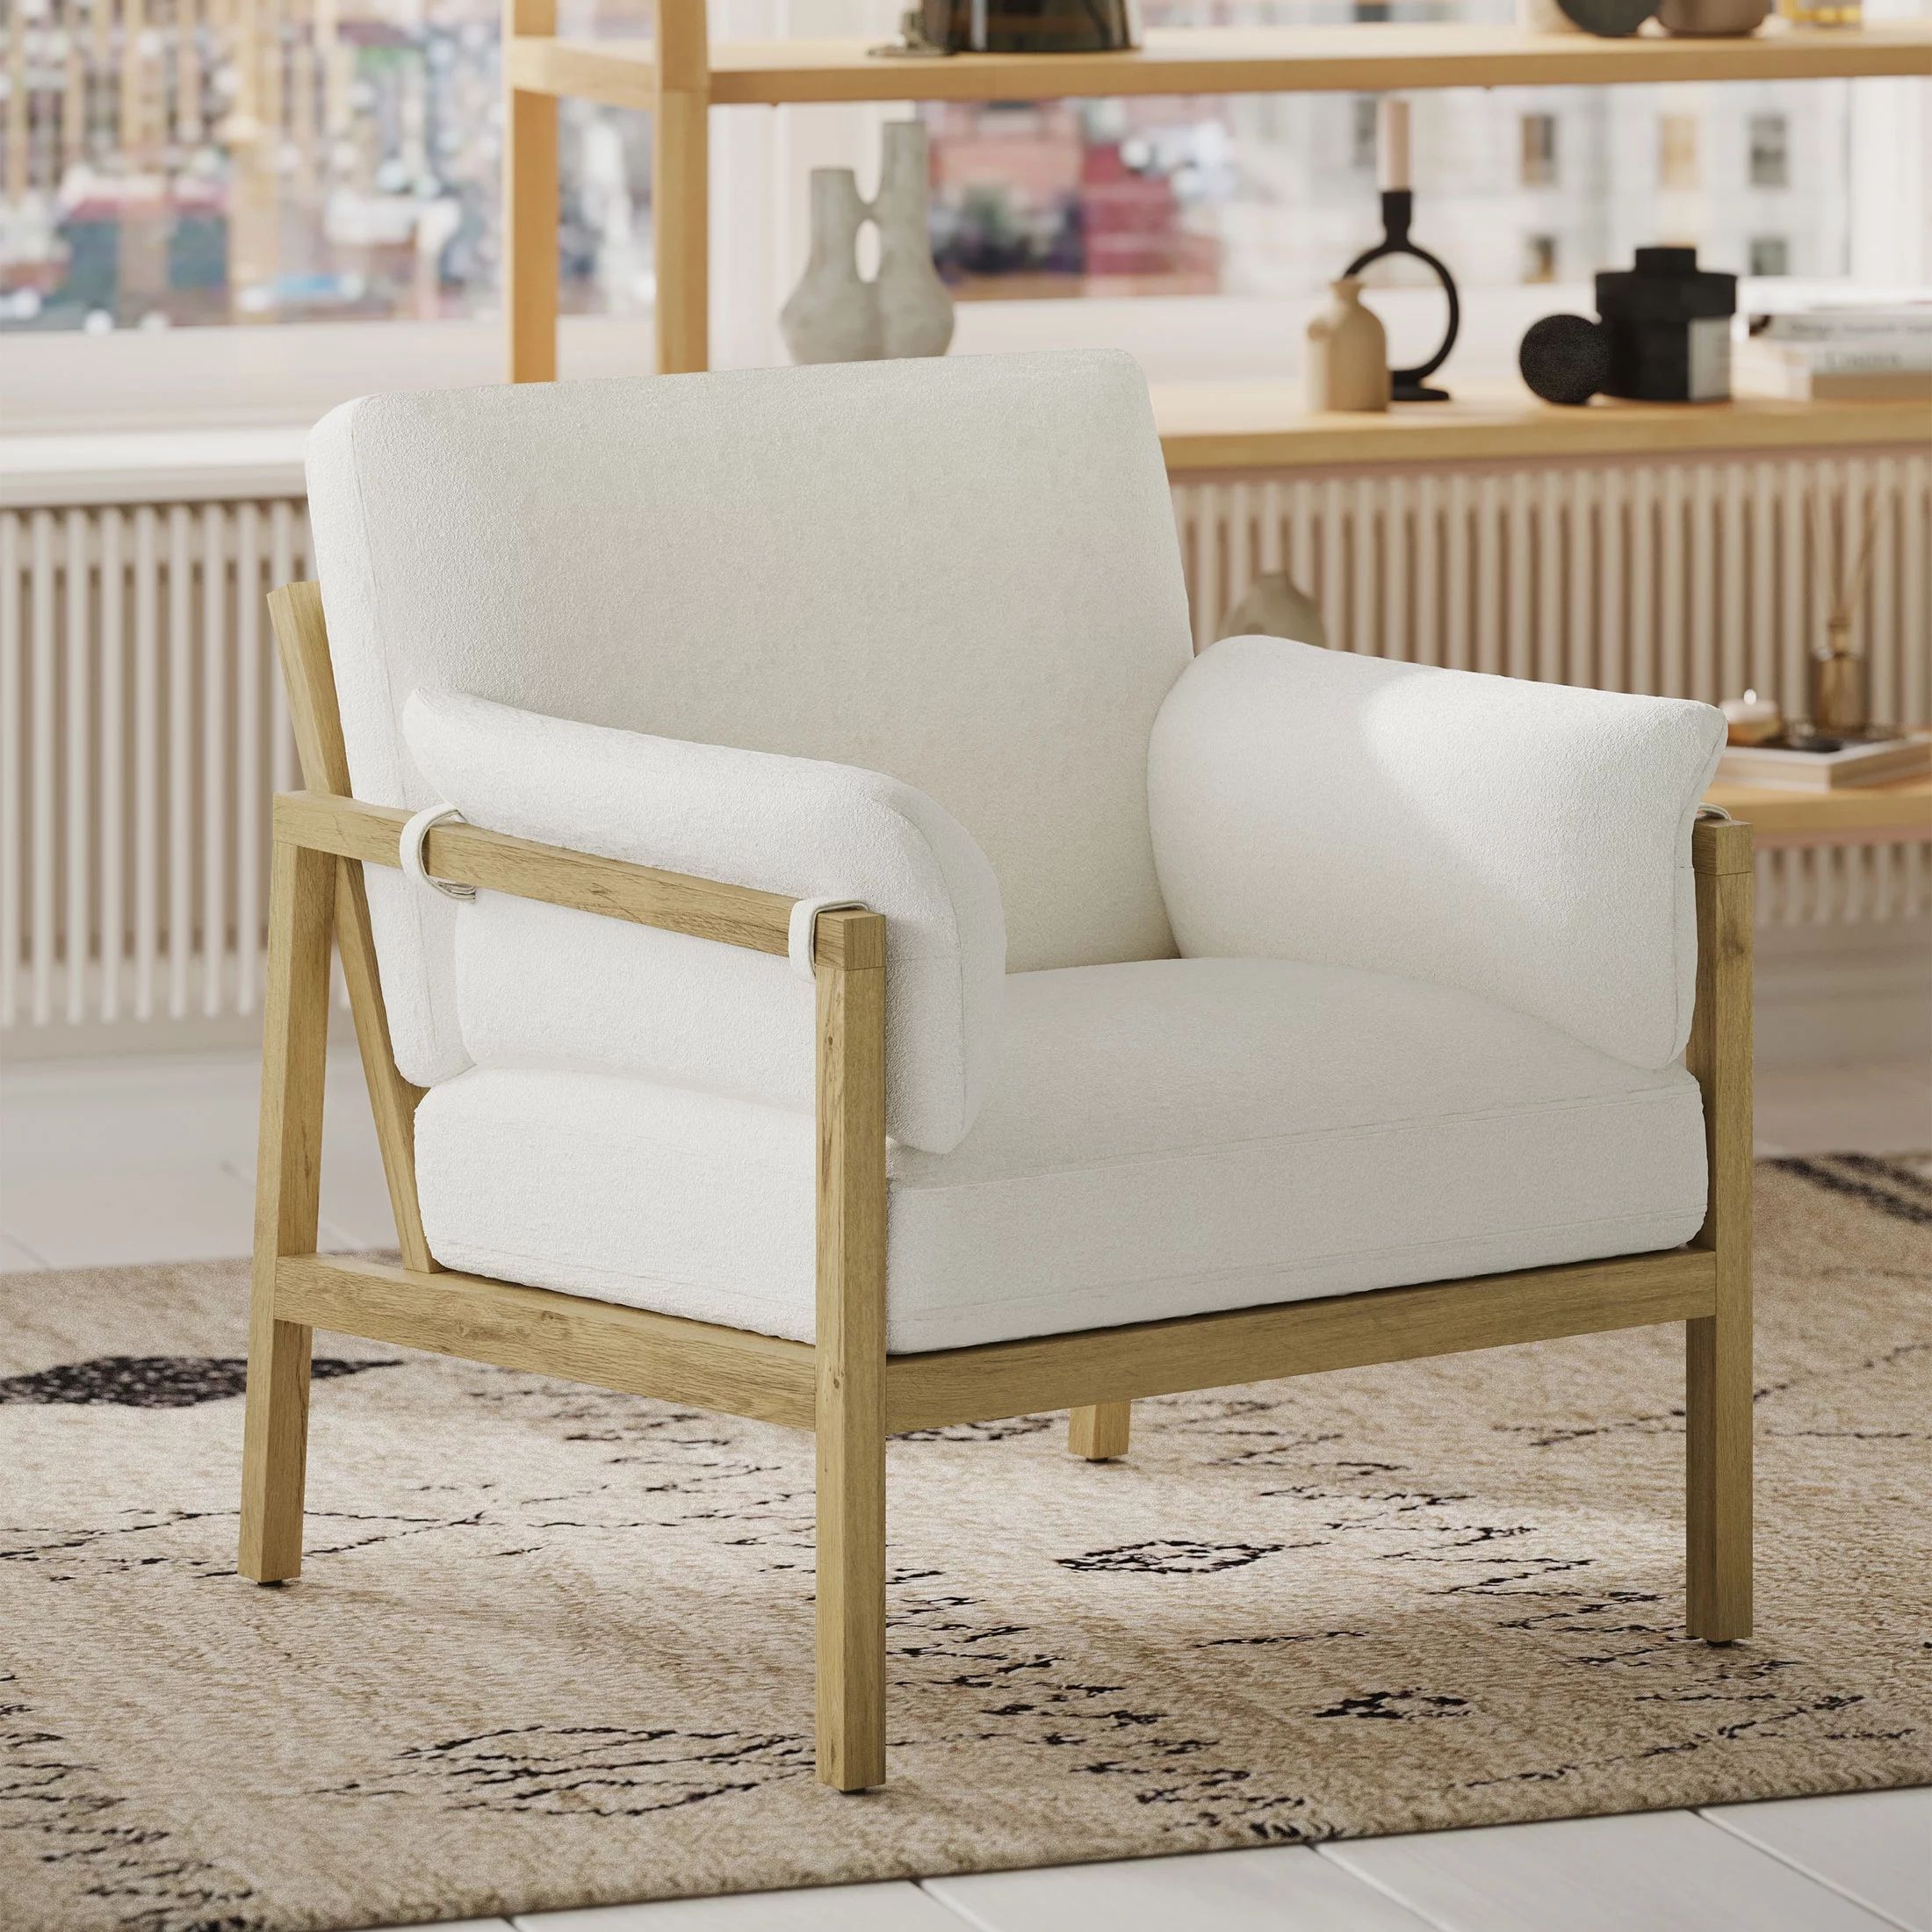 Beautiful Wrap Me Up Accent Chair with Removable Cushions by Drew, Cream | Walmart (US)